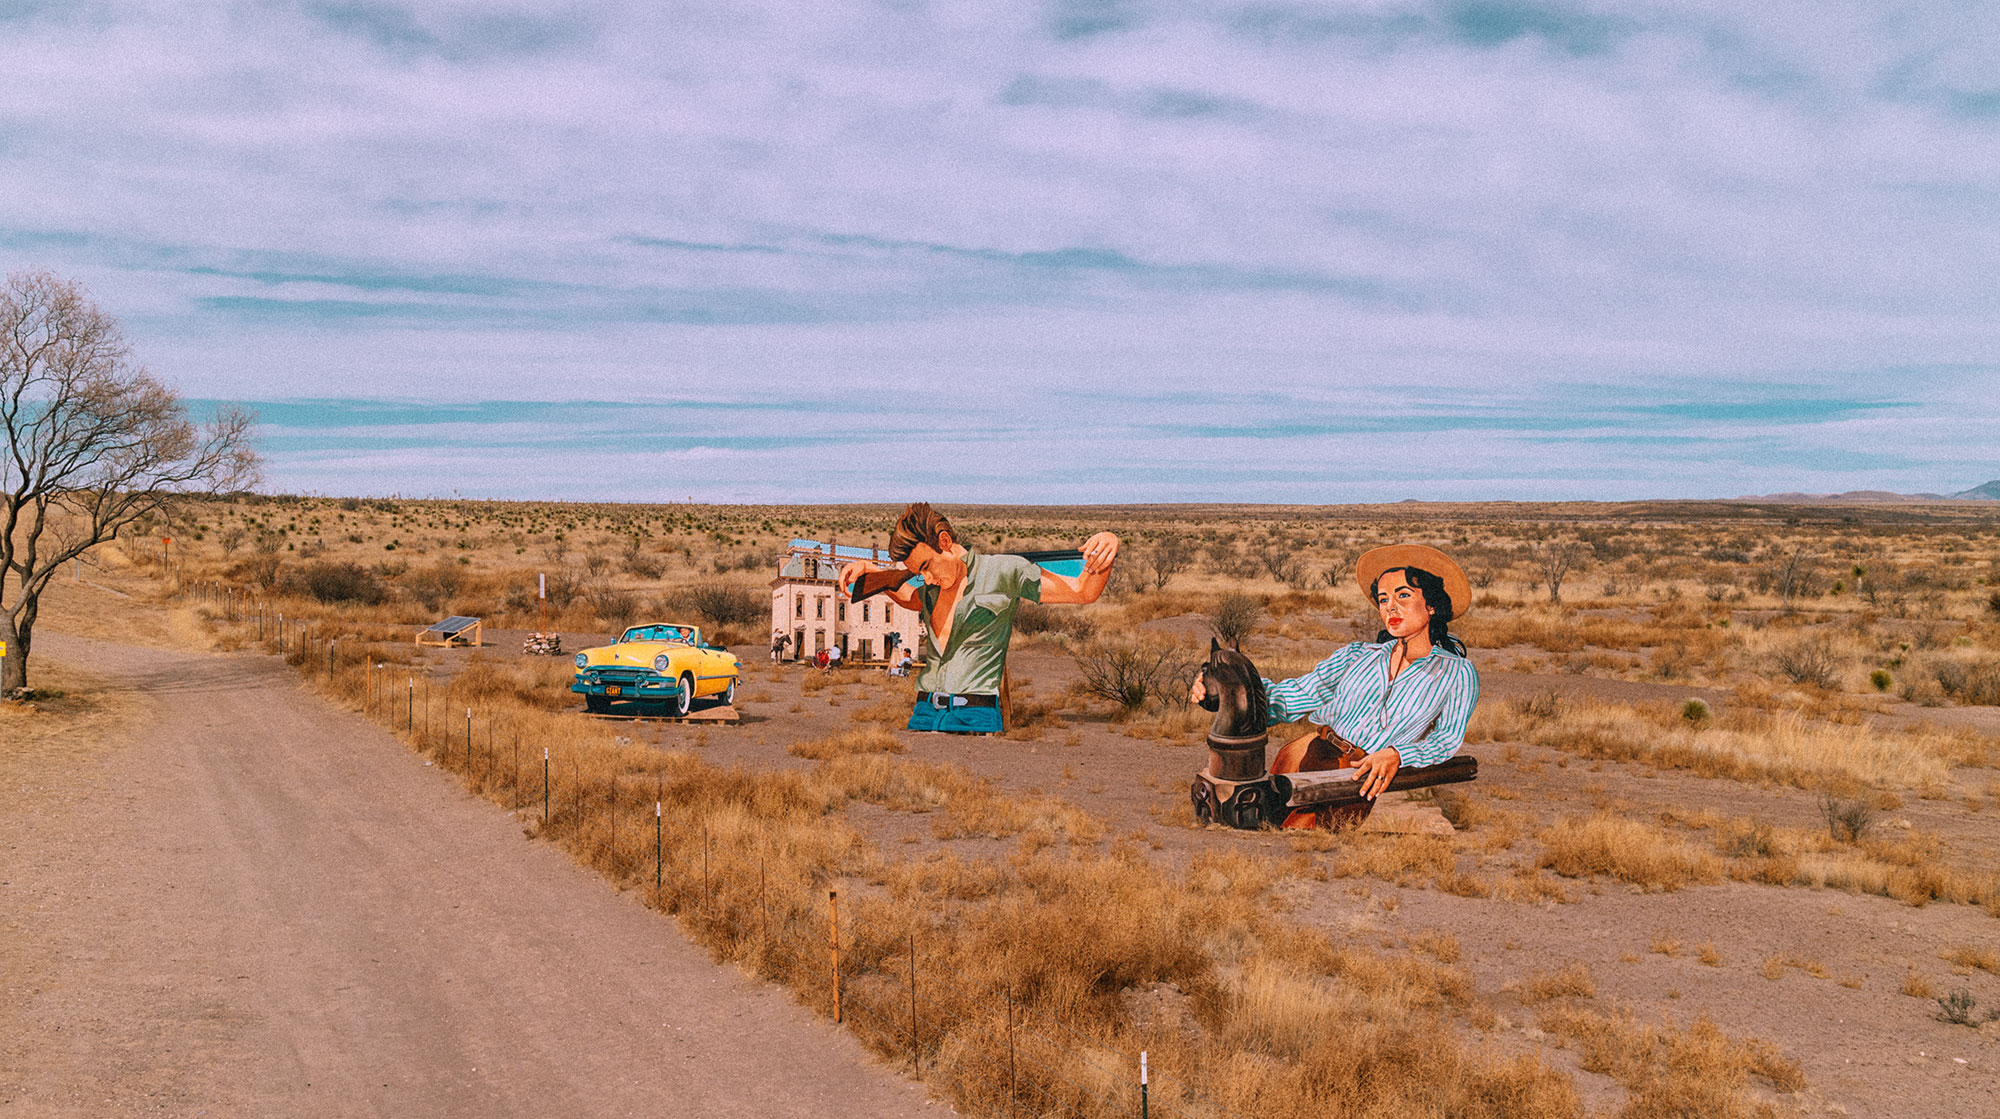 James Dean 'Giant' Mural Highway Art in Marfa, Texas / Travel, Lifestyle & Foodblog by Alice M. Huynh – Travel Texas – 7 Things To Do & See in Marfa, Texas